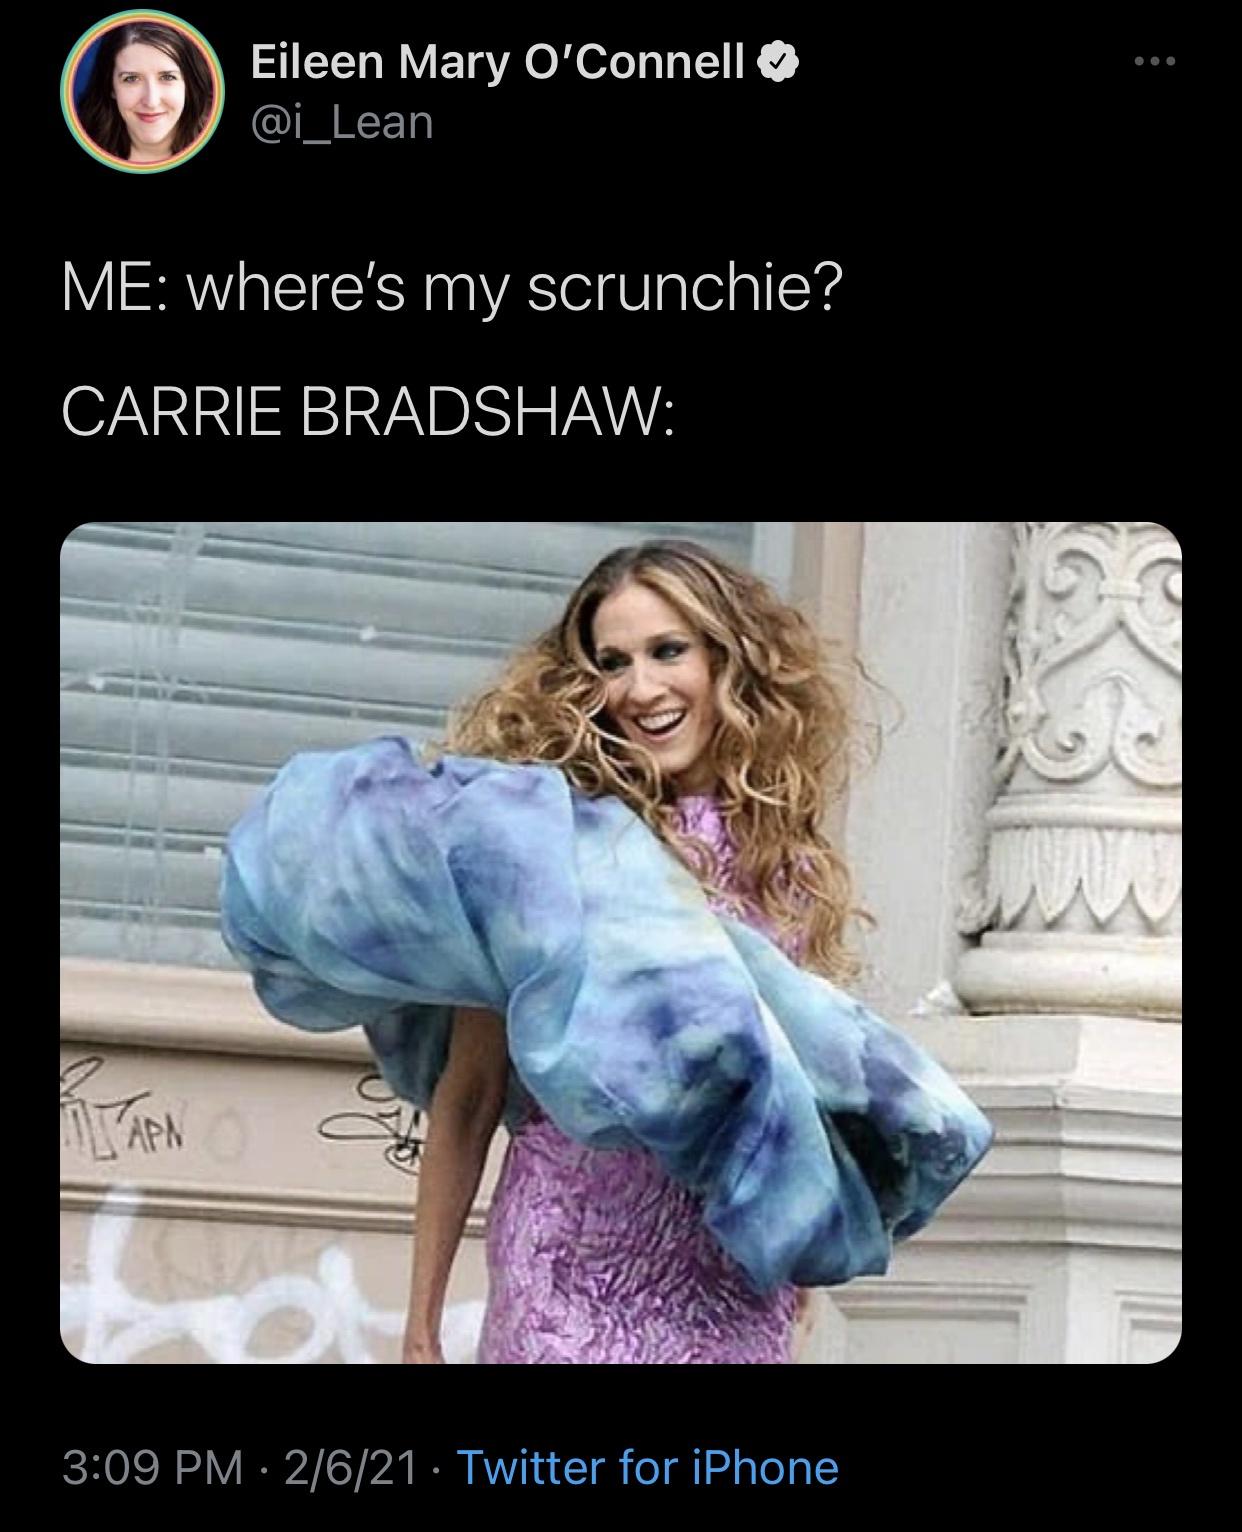 photo caption - Eileen Mary O'Connell Me where's my scrunchie? Carrie Bradshaw 2621 Twitter for iPhone